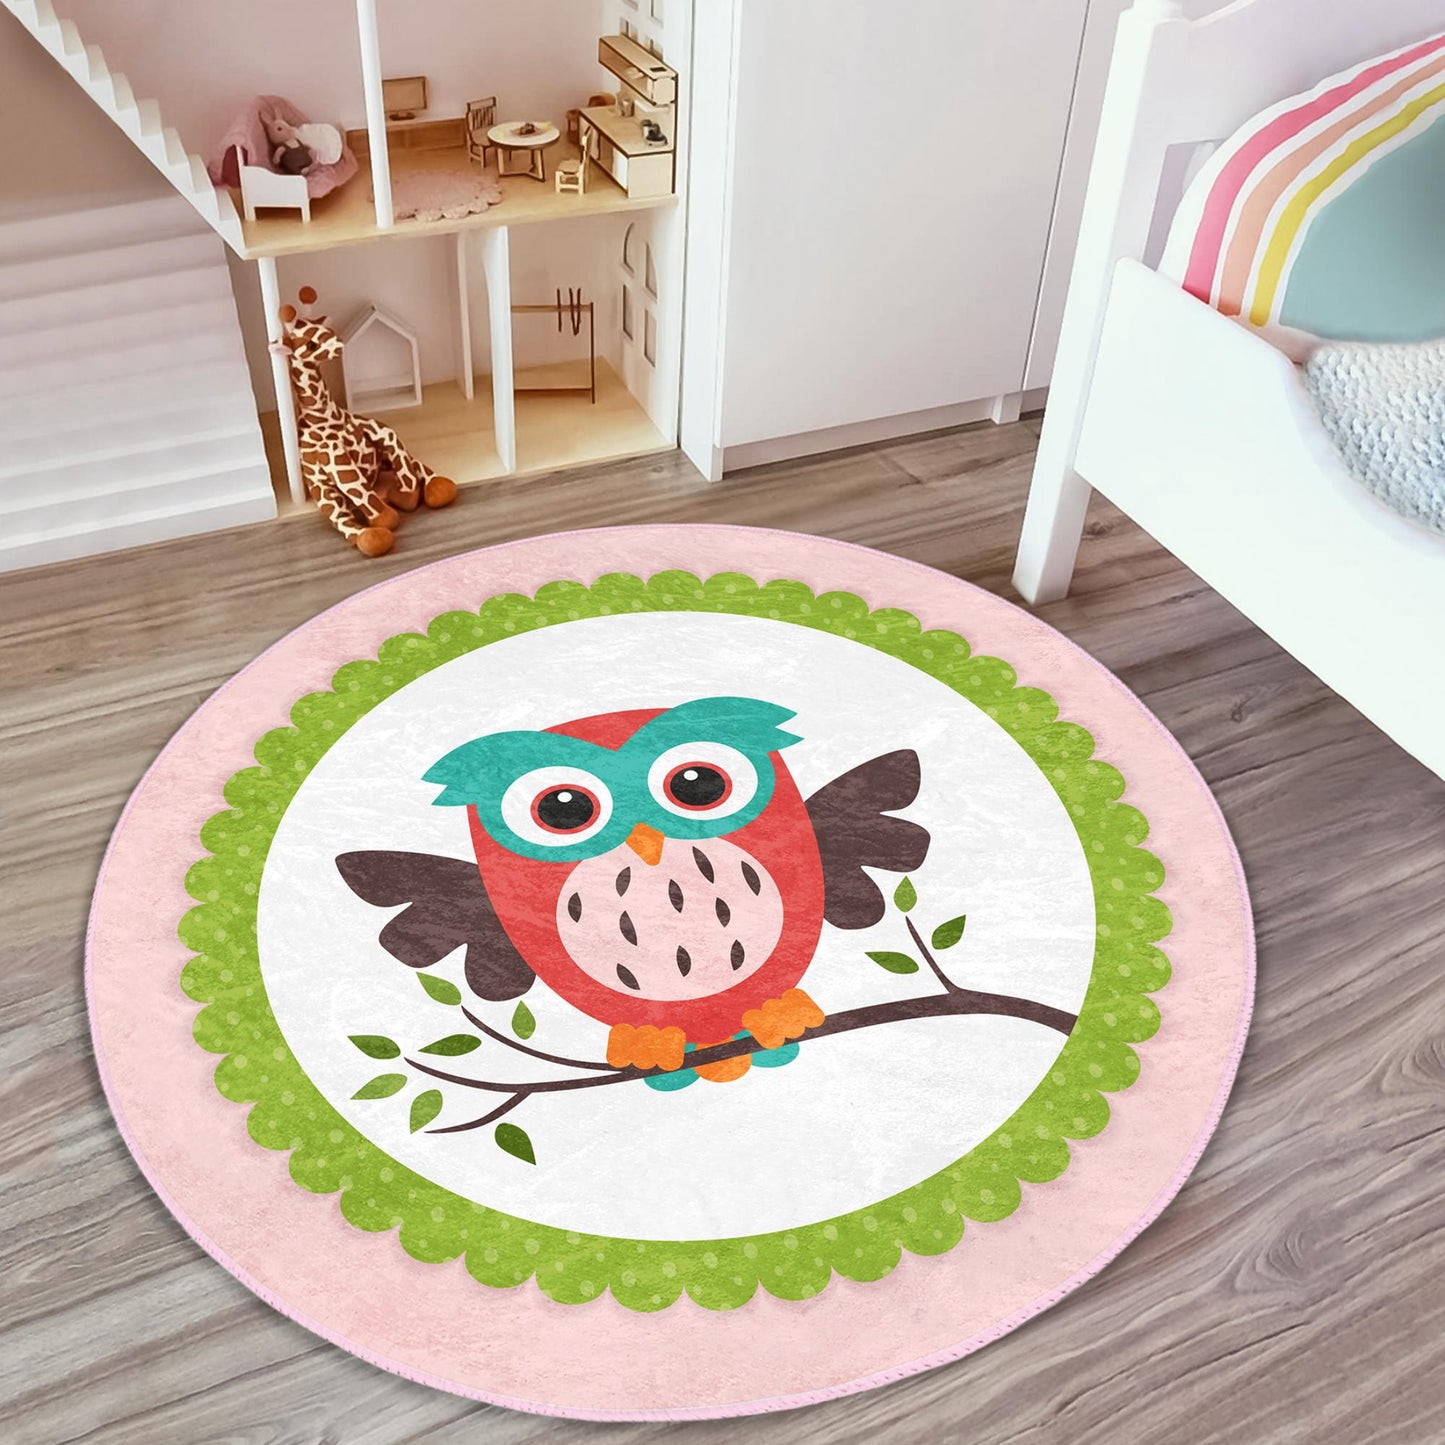 Imaginative baby room rug featuring baby owl designs for cozy playtime.